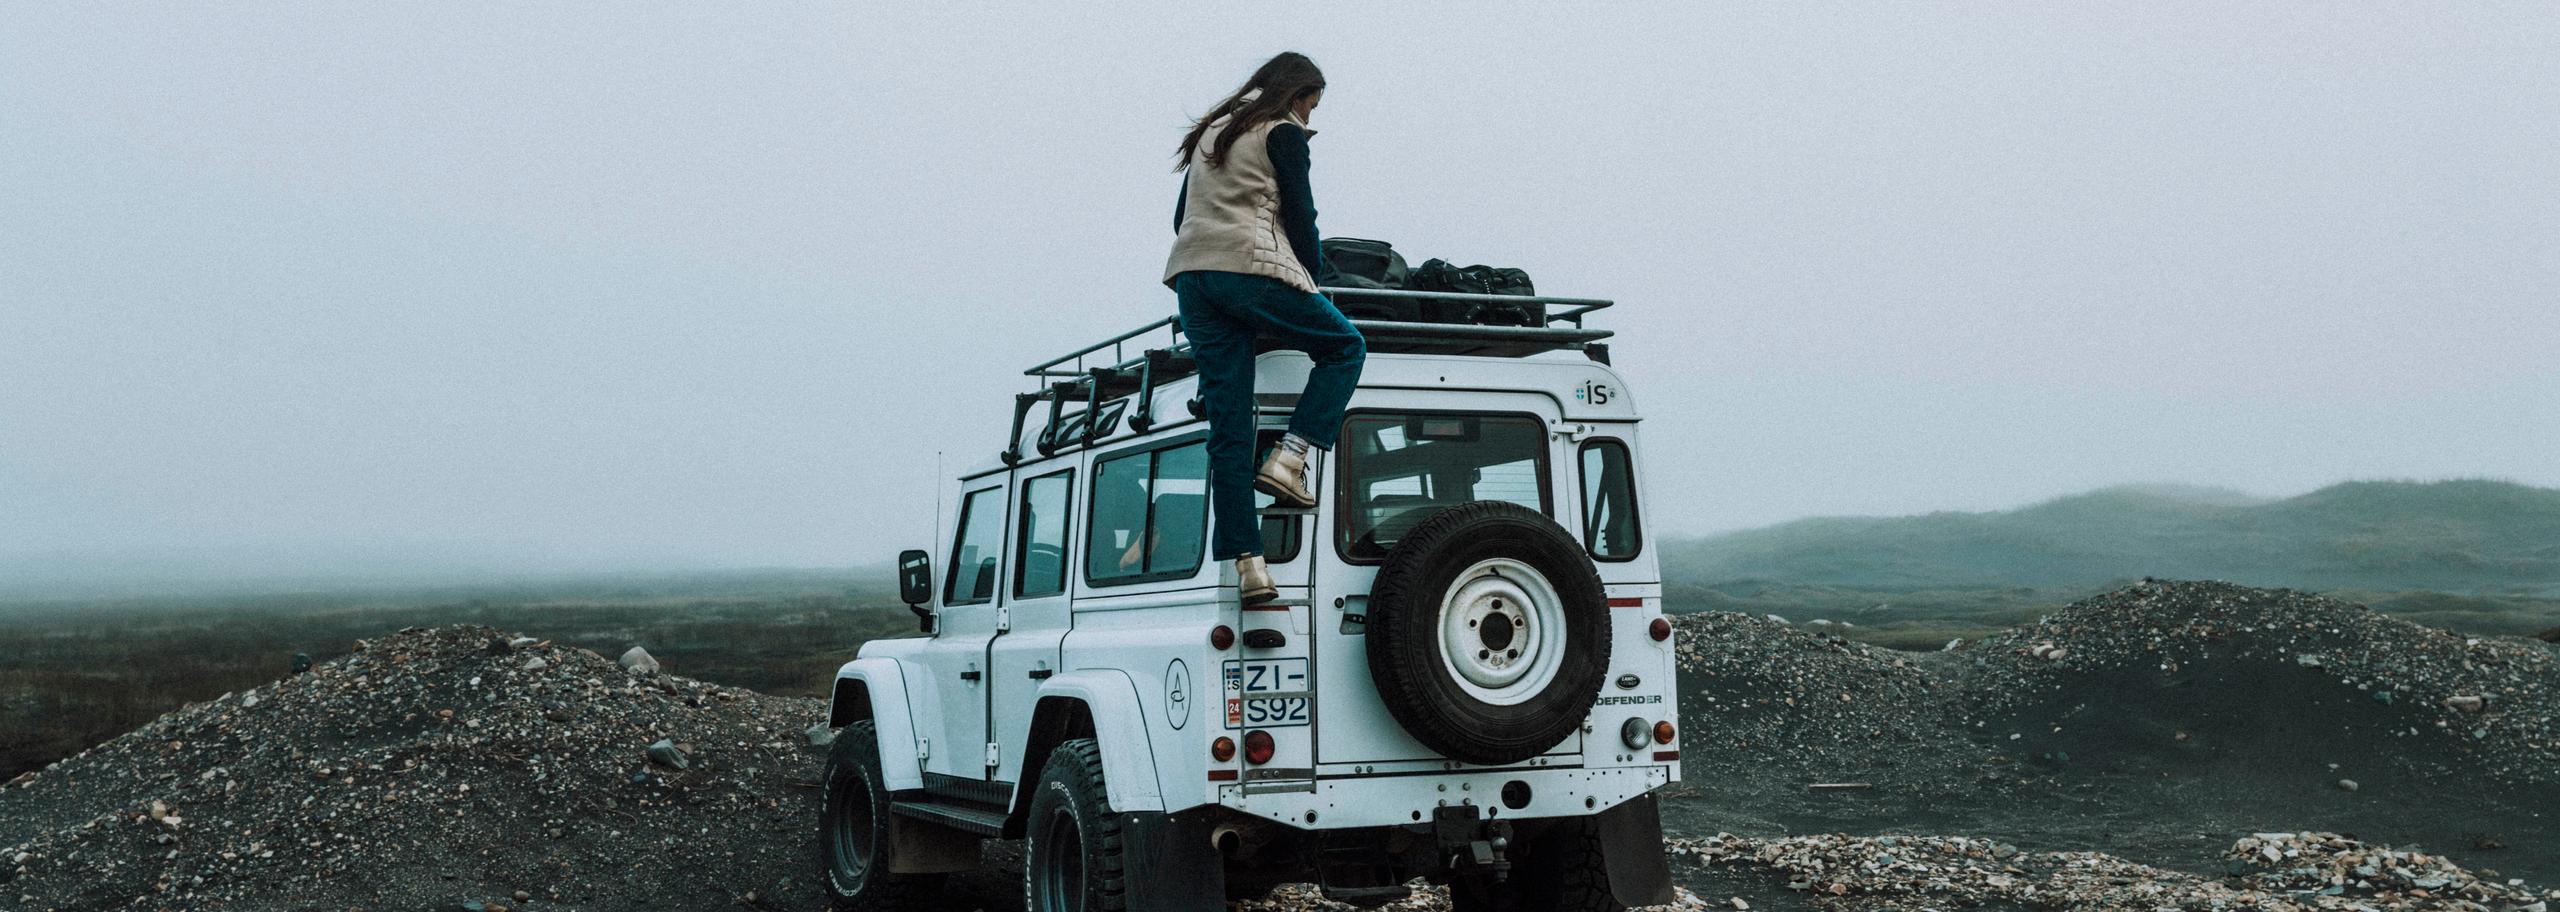 Woman stepping up to roof of white Defender truck in Iceland landscape